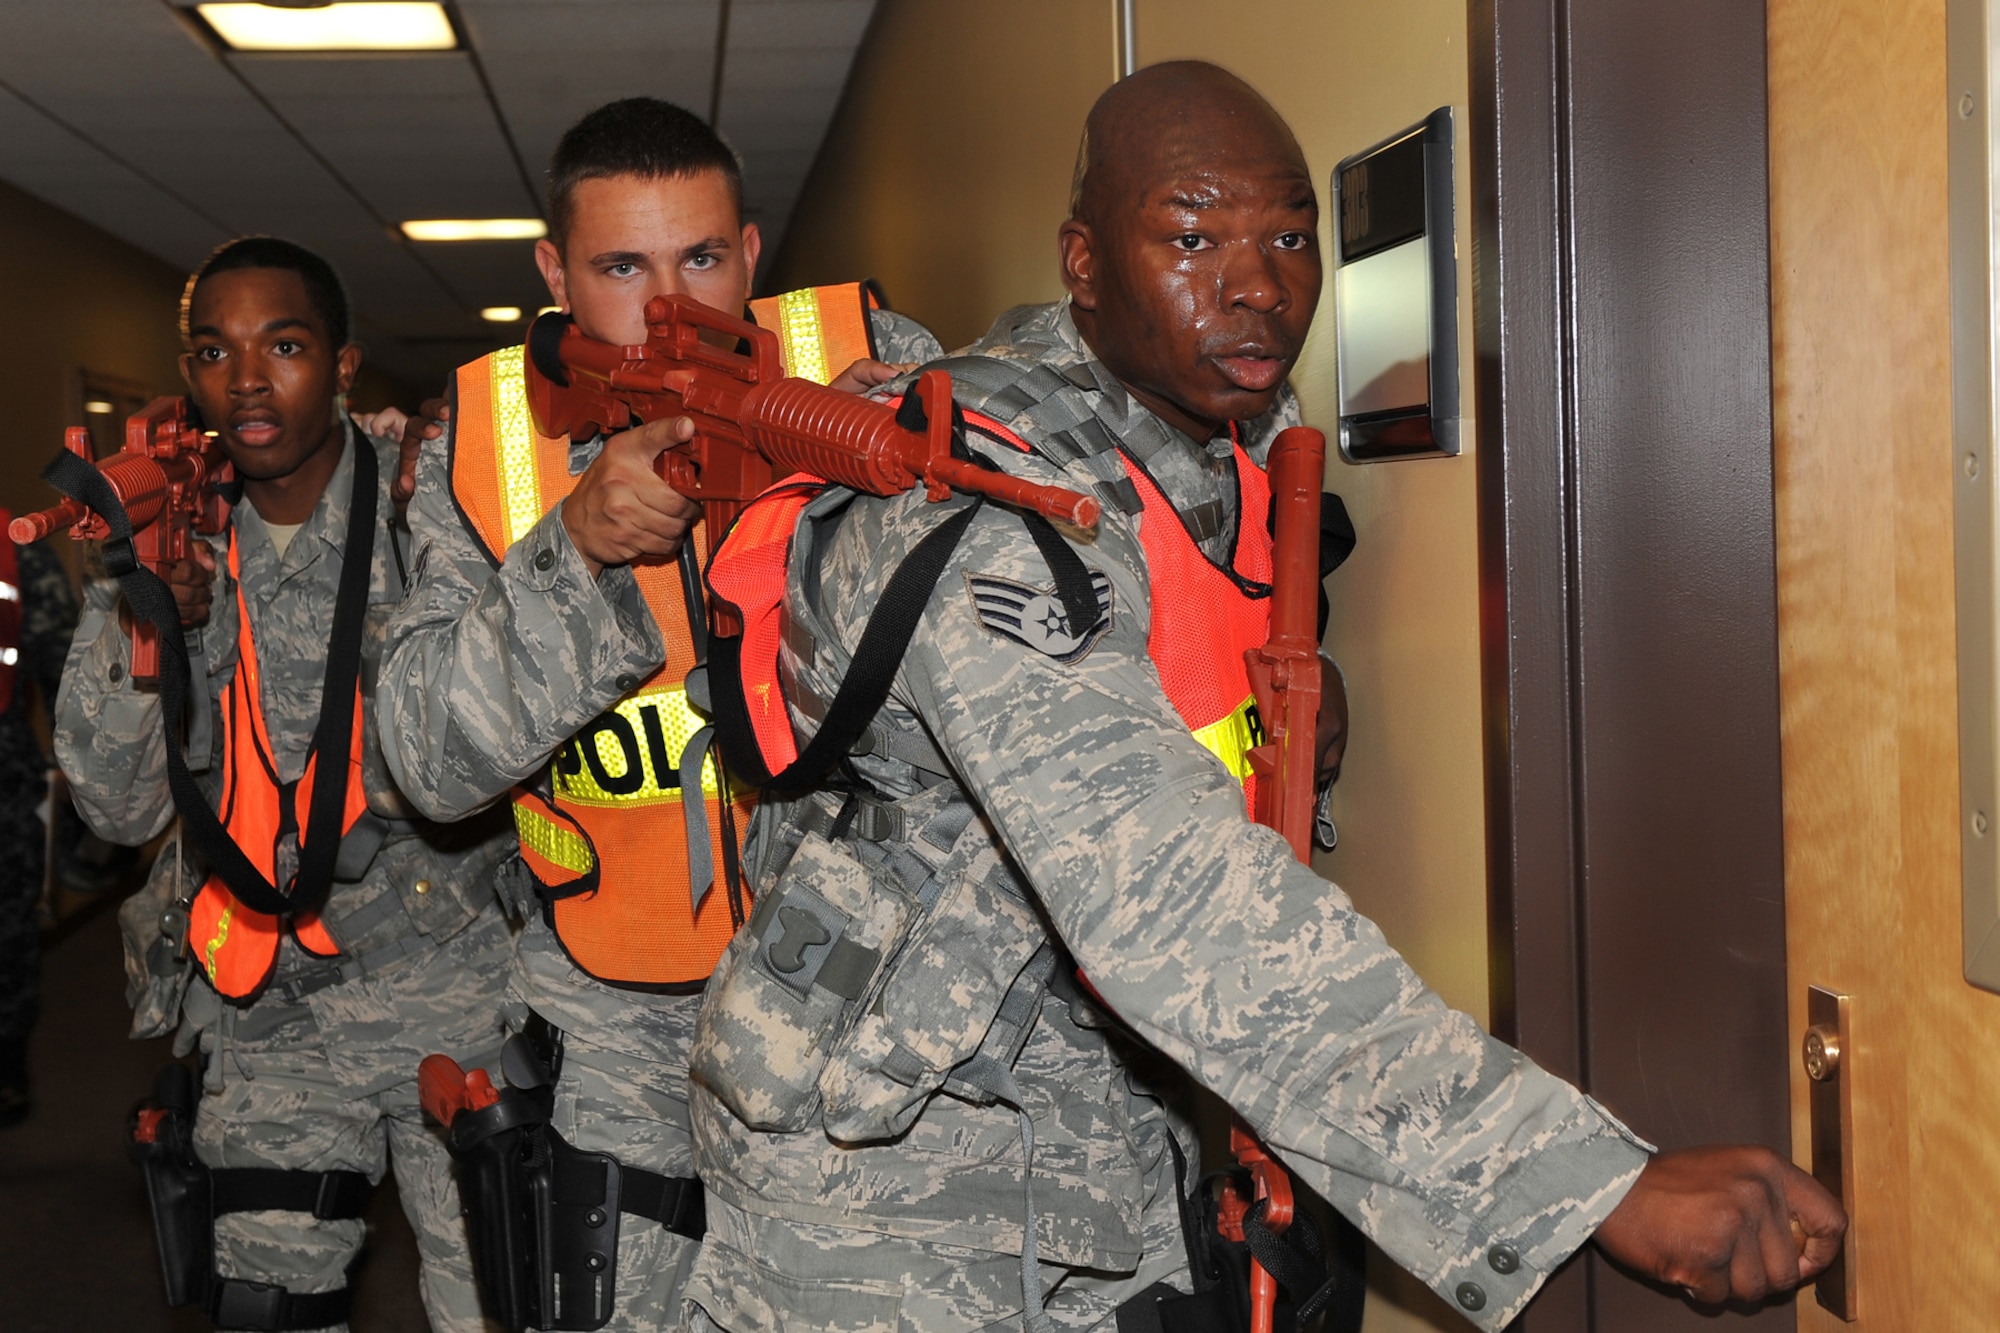 OFFUTT AIR FORCE BASE, Neb. - Team members from the 55th Security Forces Squadron check the doors during an active shooter exercise Sept. 10 in base's main customer support building.  Team Offutt's first responders conduct various exercise scenarios throughout the year to prepare for possible threats to people and resources. U.S. Air Force photo by Charles Haymond